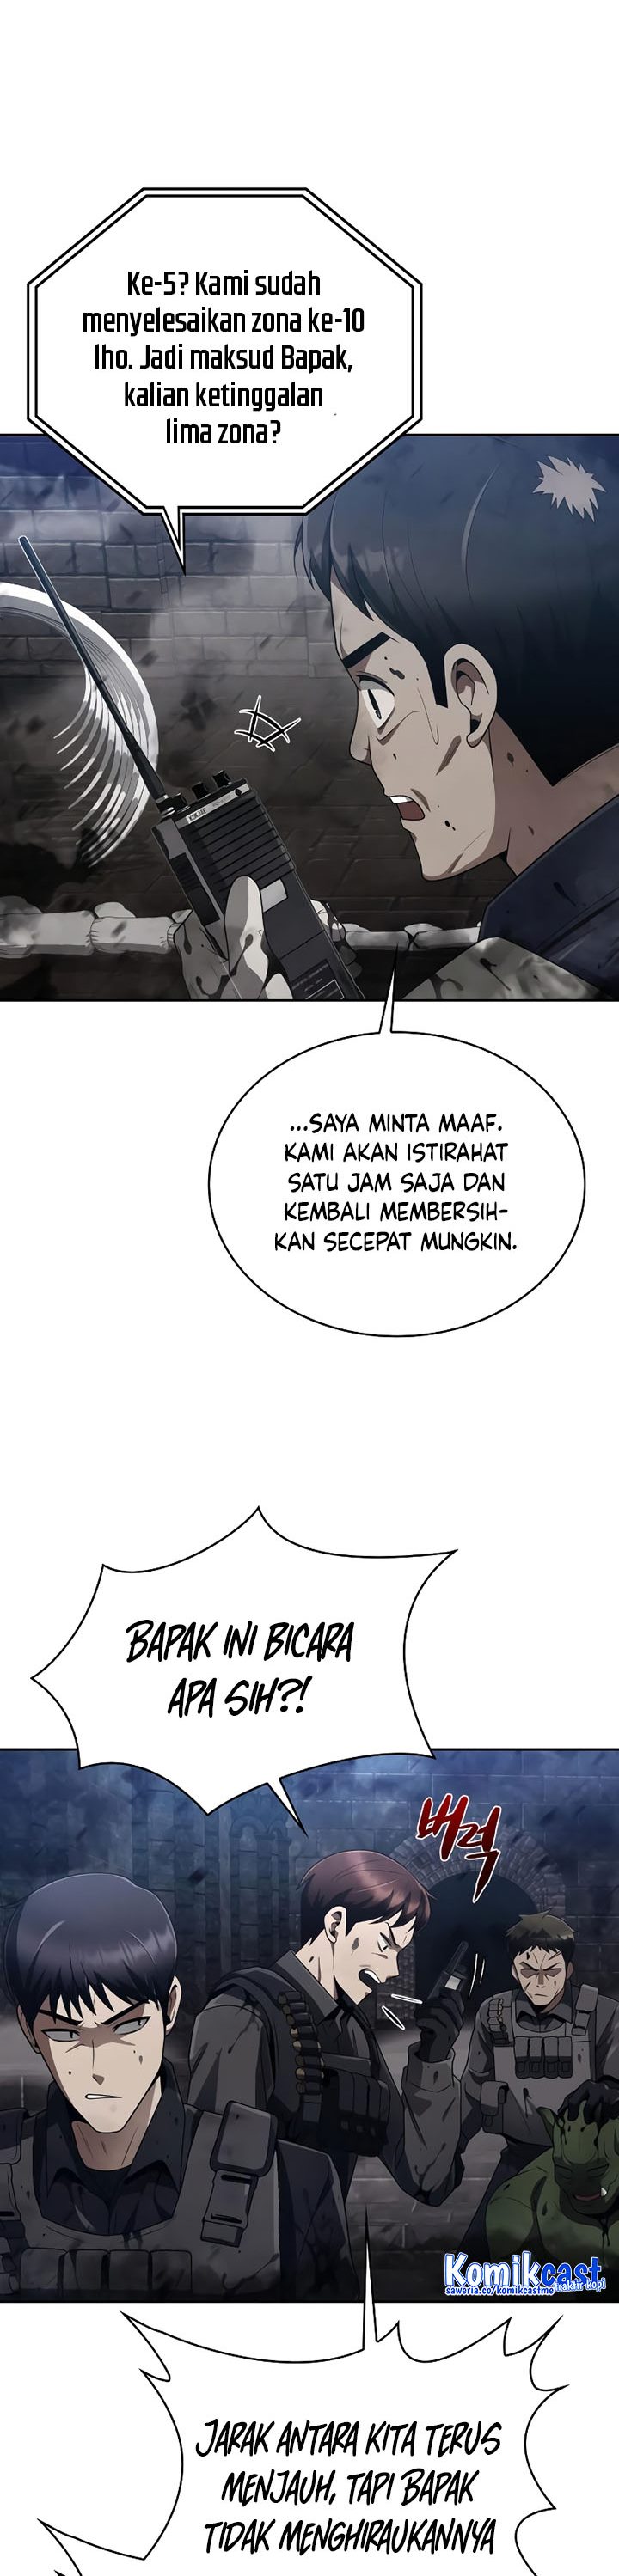 Dilarang COPAS - situs resmi www.mangacanblog.com - Komik clever cleaning life of the returned genius hunter 016 - chapter 16 17 Indonesia clever cleaning life of the returned genius hunter 016 - chapter 16 Terbaru 14|Baca Manga Komik Indonesia|Mangacan